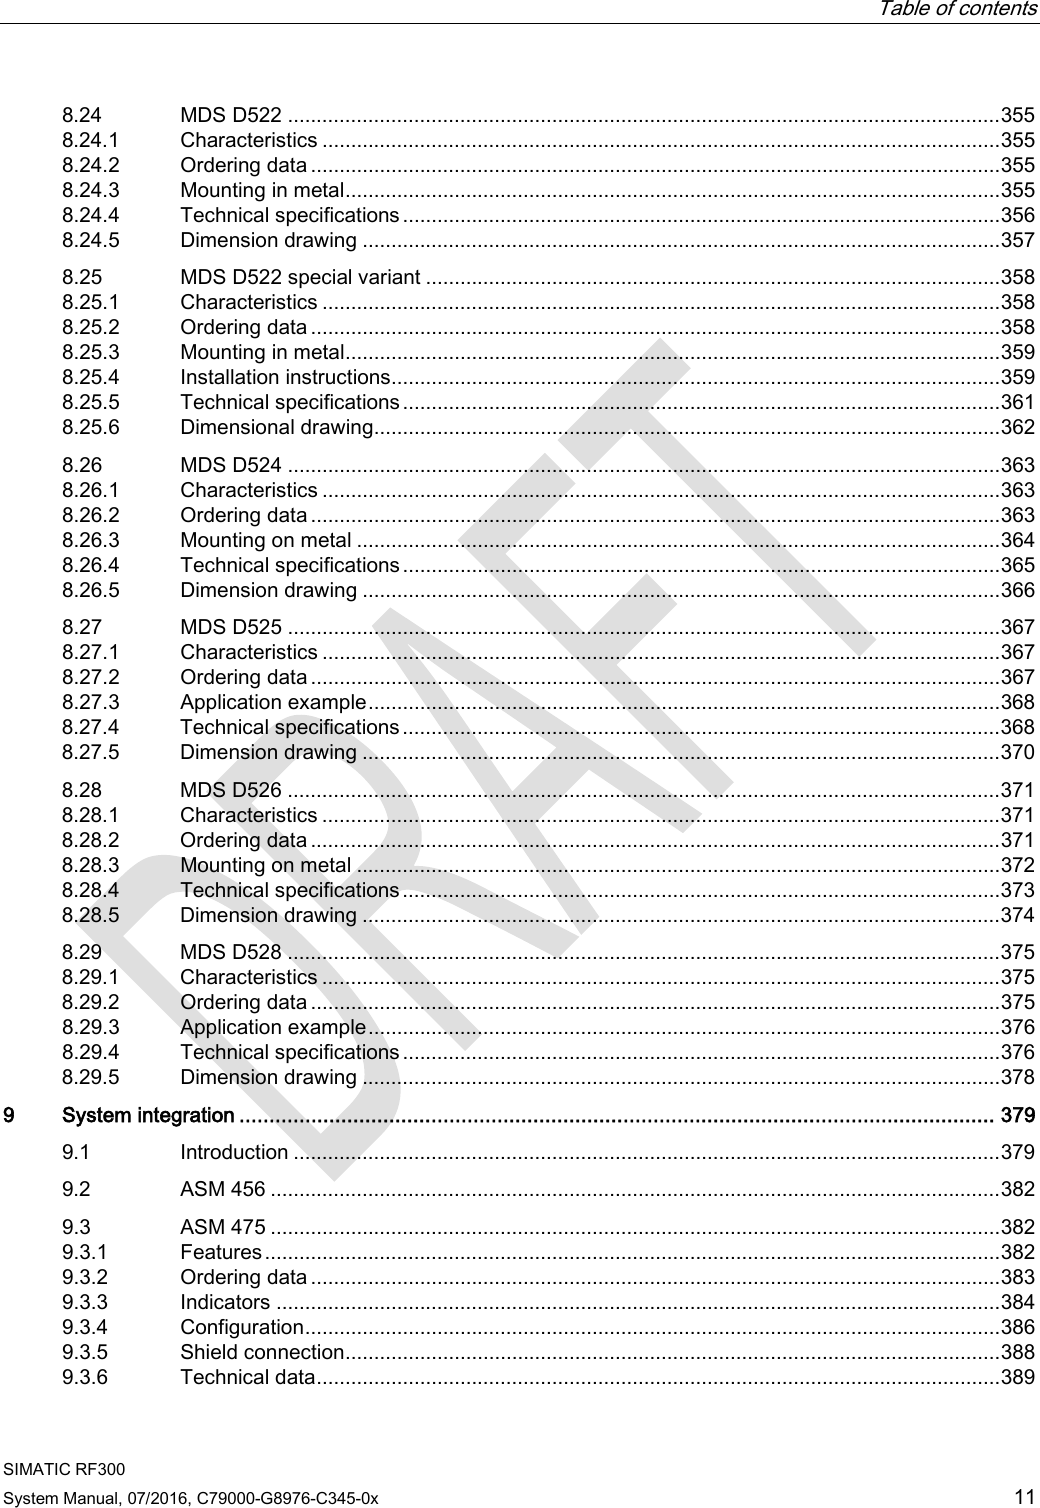  Table of contents  SIMATIC RF300 System Manual, 07/2016, C79000-G8976-C345-0x 11 8.24 MDS D522 ............................................................................................................................ 355 8.24.1 Characteristics ...................................................................................................................... 355 8.24.2 Ordering data ........................................................................................................................ 355 8.24.3 Mounting in metal .................................................................................................................. 355 8.24.4 Technical specifications ........................................................................................................ 356 8.24.5 Dimension drawing ............................................................................................................... 357 8.25 MDS D522 special variant .................................................................................................... 358 8.25.1 Characteristics ...................................................................................................................... 358 8.25.2 Ordering data ........................................................................................................................ 358 8.25.3 Mounting in metal .................................................................................................................. 359 8.25.4 Installation instructions.......................................................................................................... 359 8.25.5 Technical specifications ........................................................................................................ 361 8.25.6 Dimensional drawing............................................................................................................. 362 8.26 MDS D524 ............................................................................................................................ 363 8.26.1 Characteristics ...................................................................................................................... 363 8.26.2 Ordering data ........................................................................................................................ 363 8.26.3 Mounting on metal ................................................................................................................ 364 8.26.4 Technical specifications ........................................................................................................ 365 8.26.5 Dimension drawing ............................................................................................................... 366 8.27 MDS D525 ............................................................................................................................ 367 8.27.1 Characteristics ...................................................................................................................... 367 8.27.2 Ordering data ........................................................................................................................ 367 8.27.3 Application example .............................................................................................................. 368 8.27.4 Technical specifications ........................................................................................................ 368 8.27.5 Dimension drawing ............................................................................................................... 370 8.28 MDS D526 ............................................................................................................................ 371 8.28.1 Characteristics ...................................................................................................................... 371 8.28.2 Ordering data ........................................................................................................................ 371 8.28.3 Mounting on metal ................................................................................................................ 372 8.28.4 Technical specifications ........................................................................................................ 373 8.28.5 Dimension drawing ............................................................................................................... 374 8.29 MDS D528 ............................................................................................................................ 375 8.29.1 Characteristics ...................................................................................................................... 375 8.29.2 Ordering data ........................................................................................................................ 375 8.29.3  Application example .............................................................................................................. 376 8.29.4 Technical specifications ........................................................................................................ 376 8.29.5 Dimension drawing ............................................................................................................... 378 9  System integration .............................................................................................................................. 379 9.1 Introduction ........................................................................................................................... 379 9.2 ASM 456 ............................................................................................................................... 382 9.3 ASM 475 ............................................................................................................................... 382 9.3.1 Features ................................................................................................................................ 382 9.3.2 Ordering data ........................................................................................................................ 383 9.3.3 Indicators .............................................................................................................................. 384 9.3.4 Configuration ......................................................................................................................... 386 9.3.5 Shield connection .................................................................................................................. 388 9.3.6 Technical data ....................................................................................................................... 389 